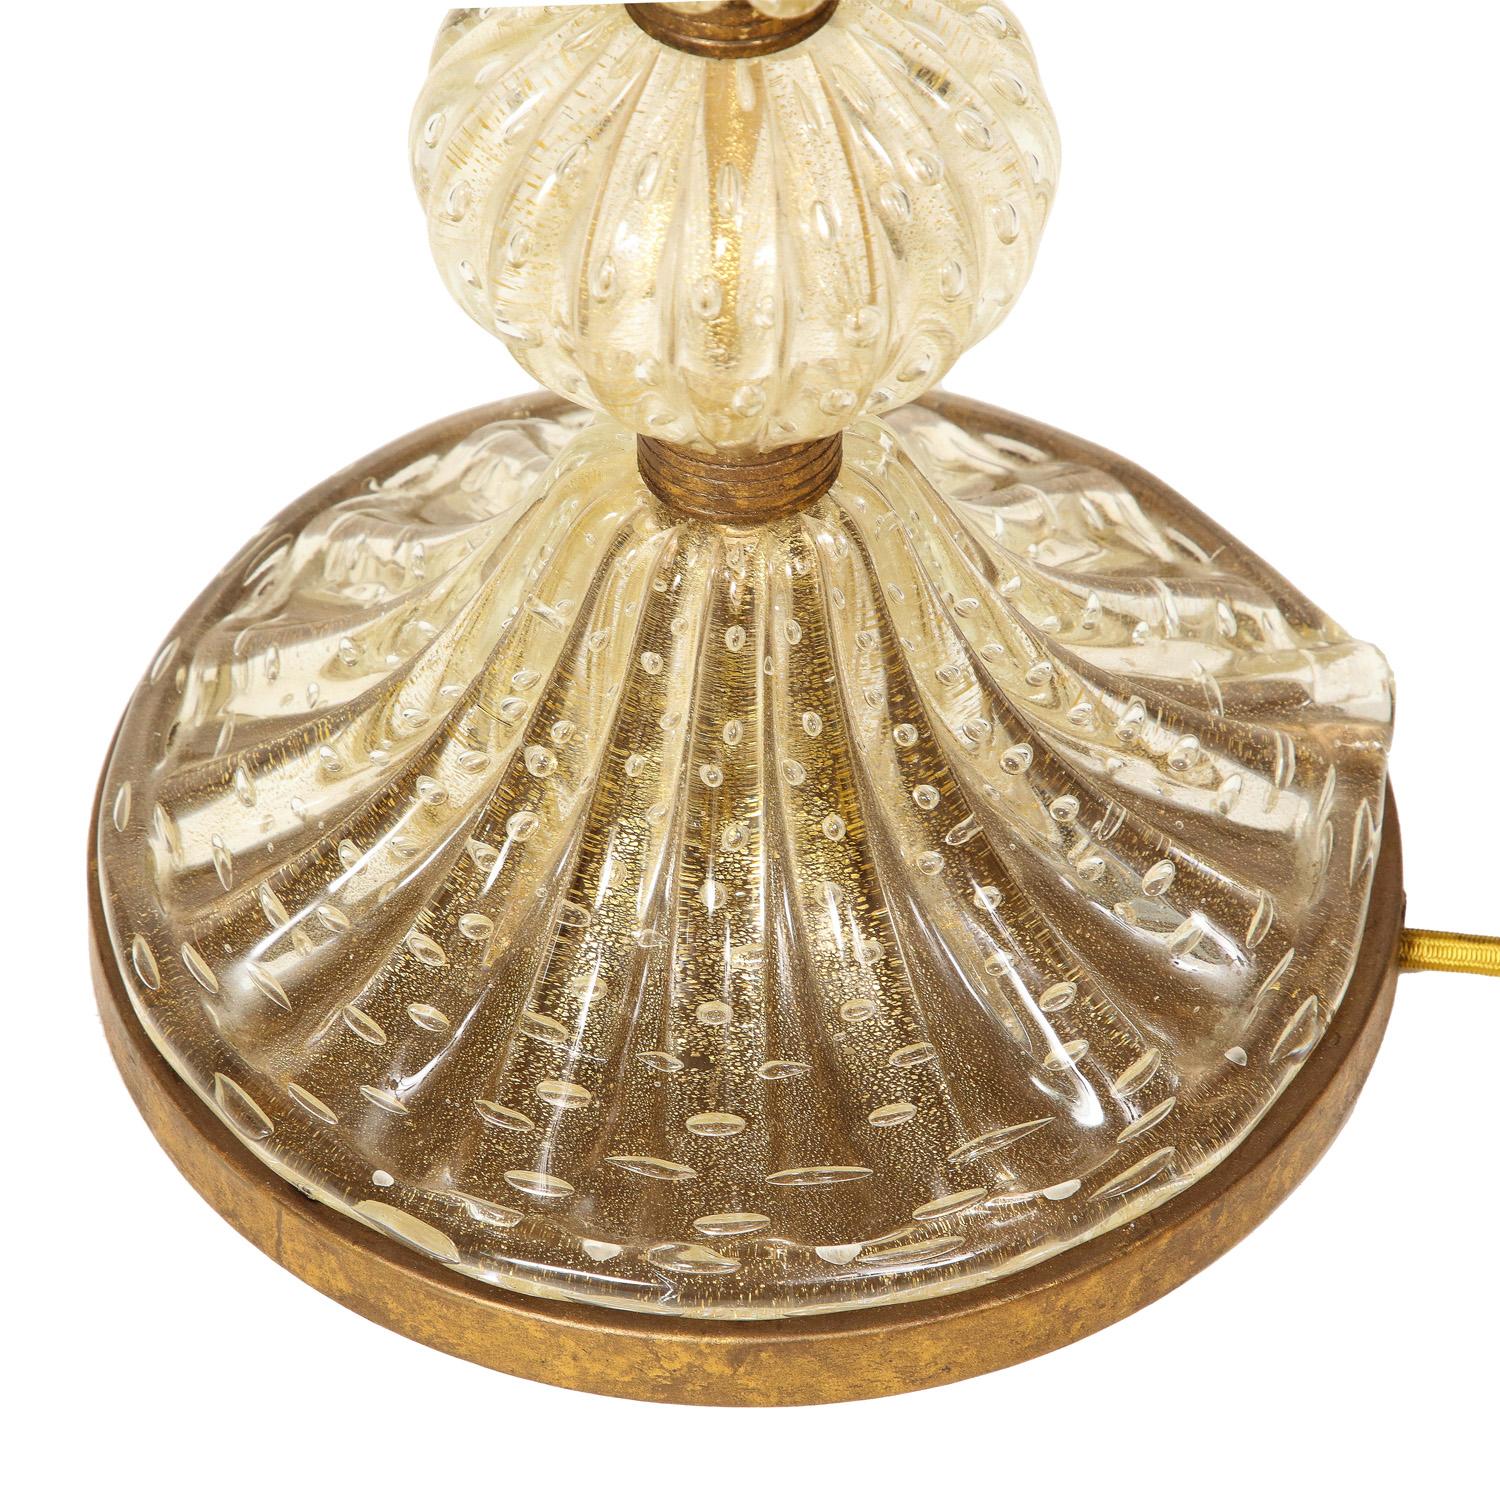 Barovier & Toso Murano Bullicante Glass Table Lamp with Avventurina, 1950s In Good Condition For Sale In New York, NY